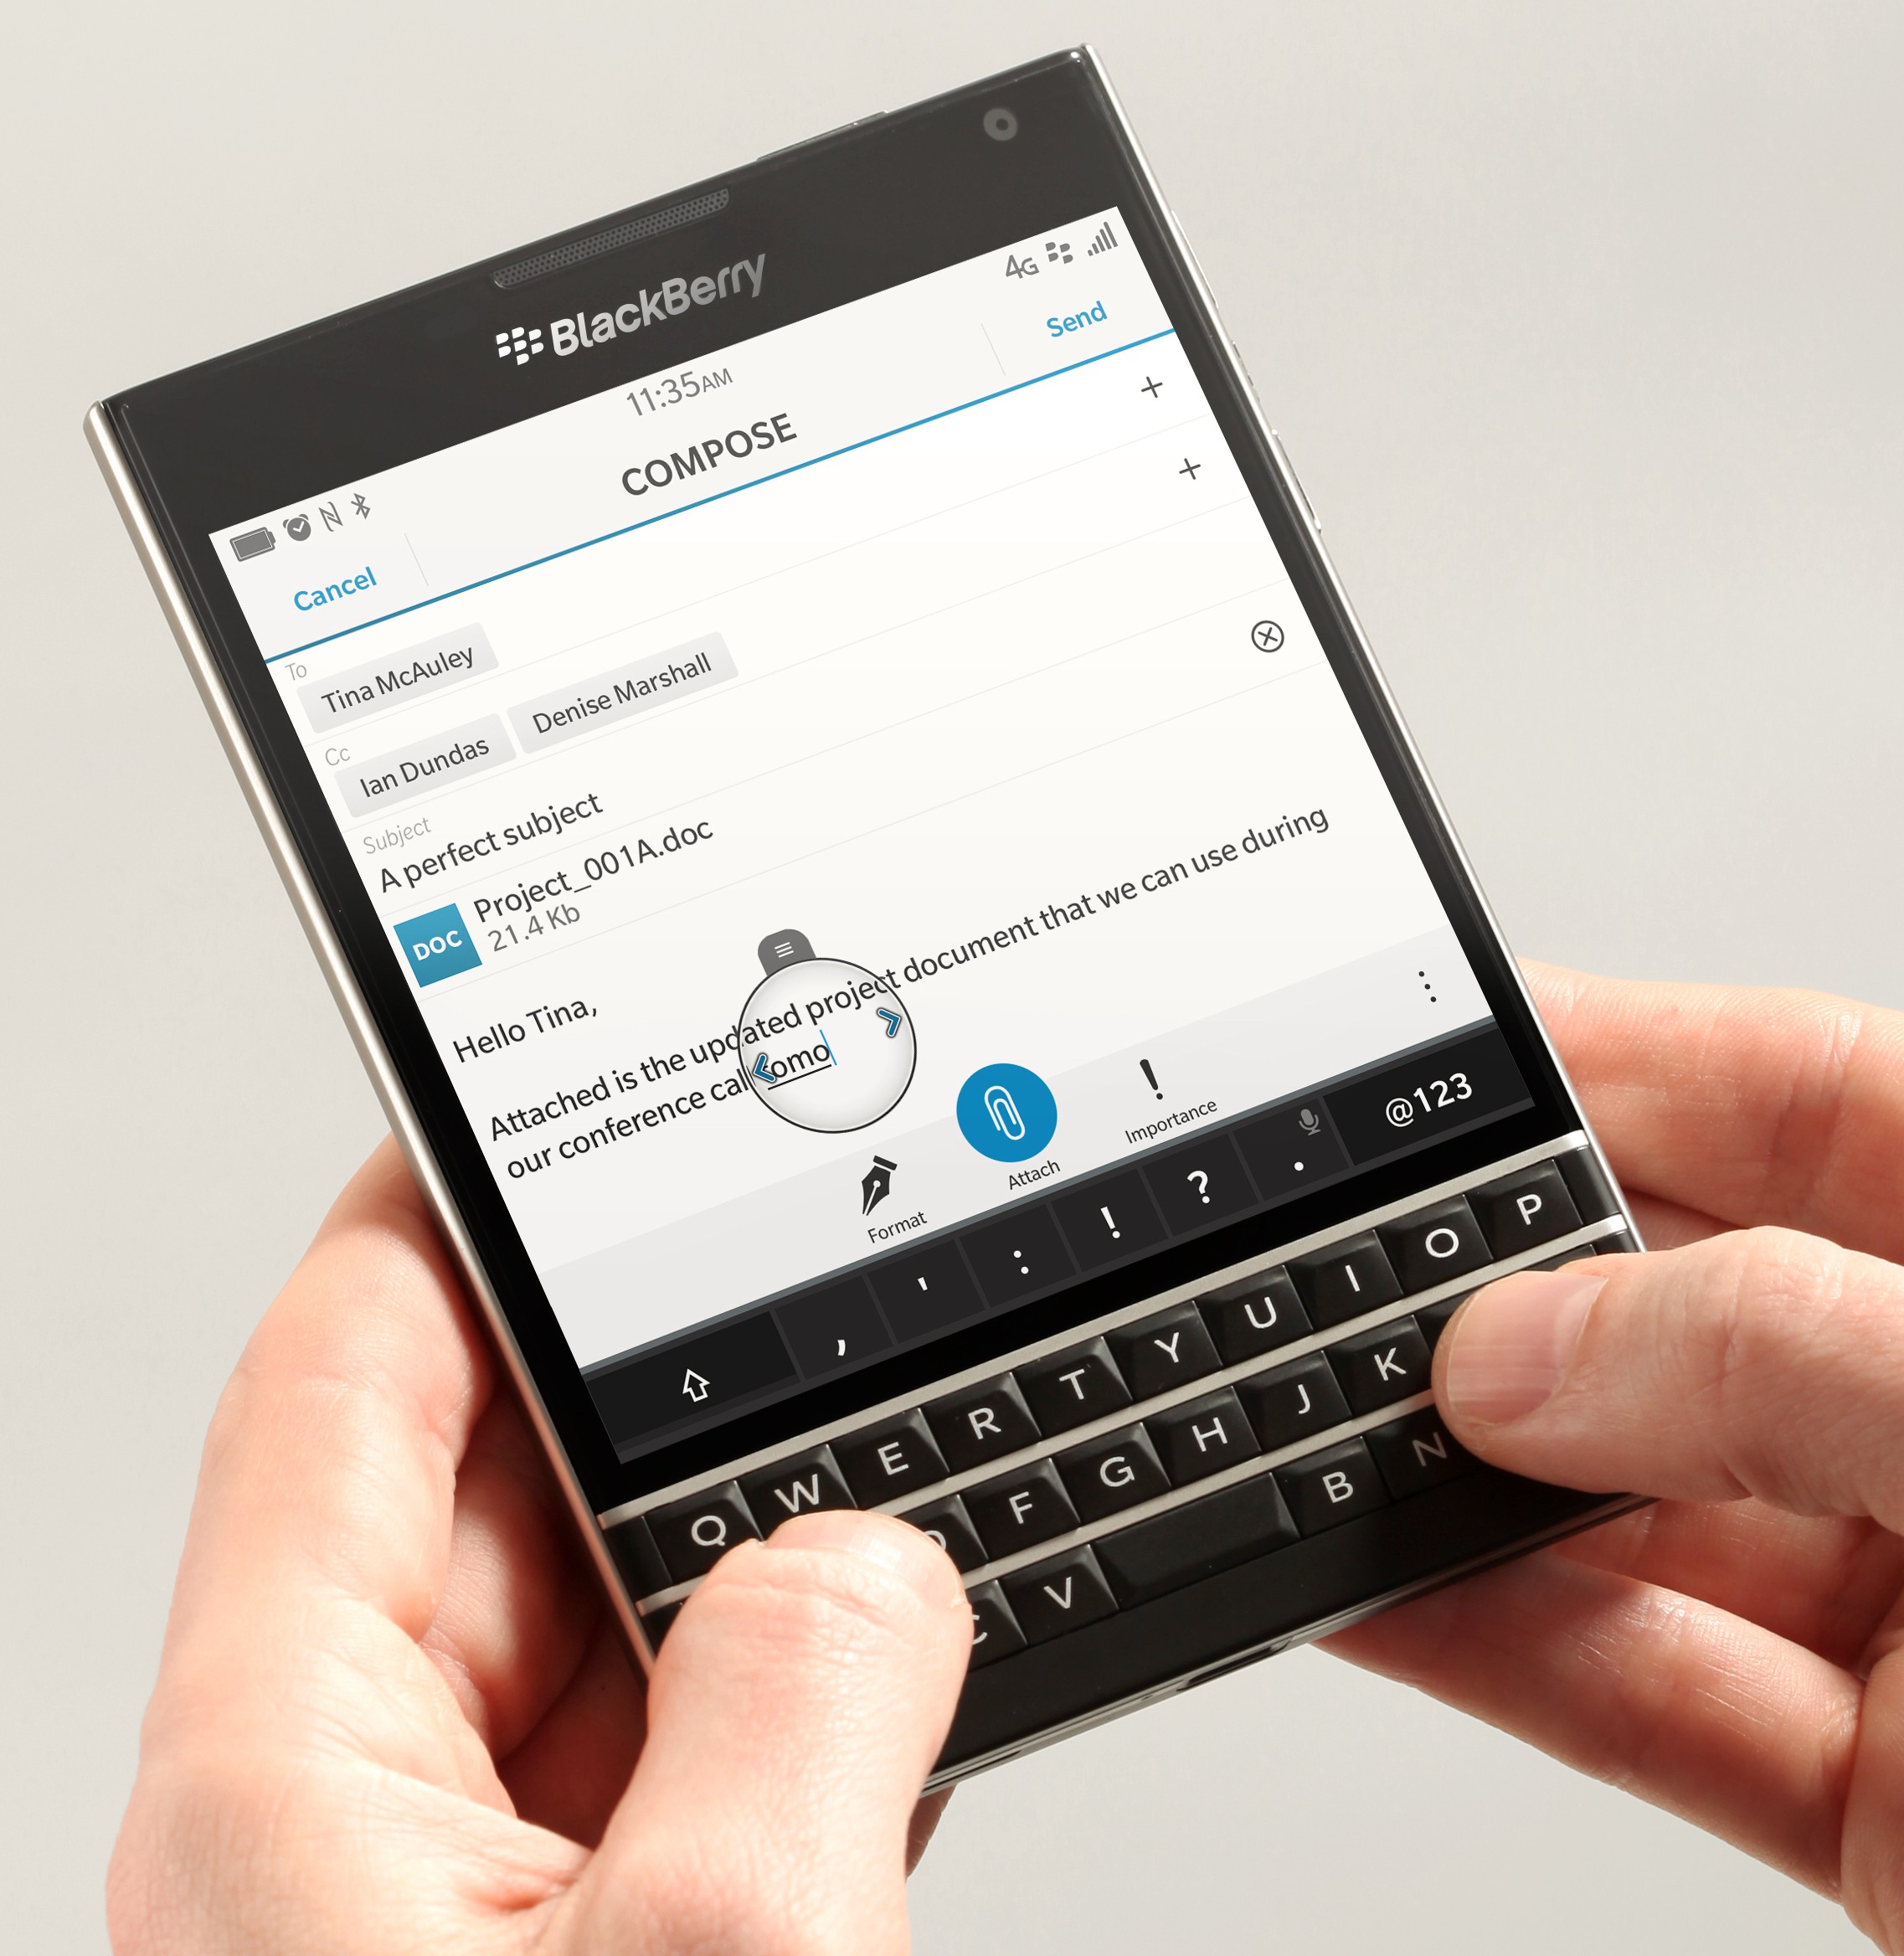 Blackberry Passport Video Renders Show The Smartphone From All Angles